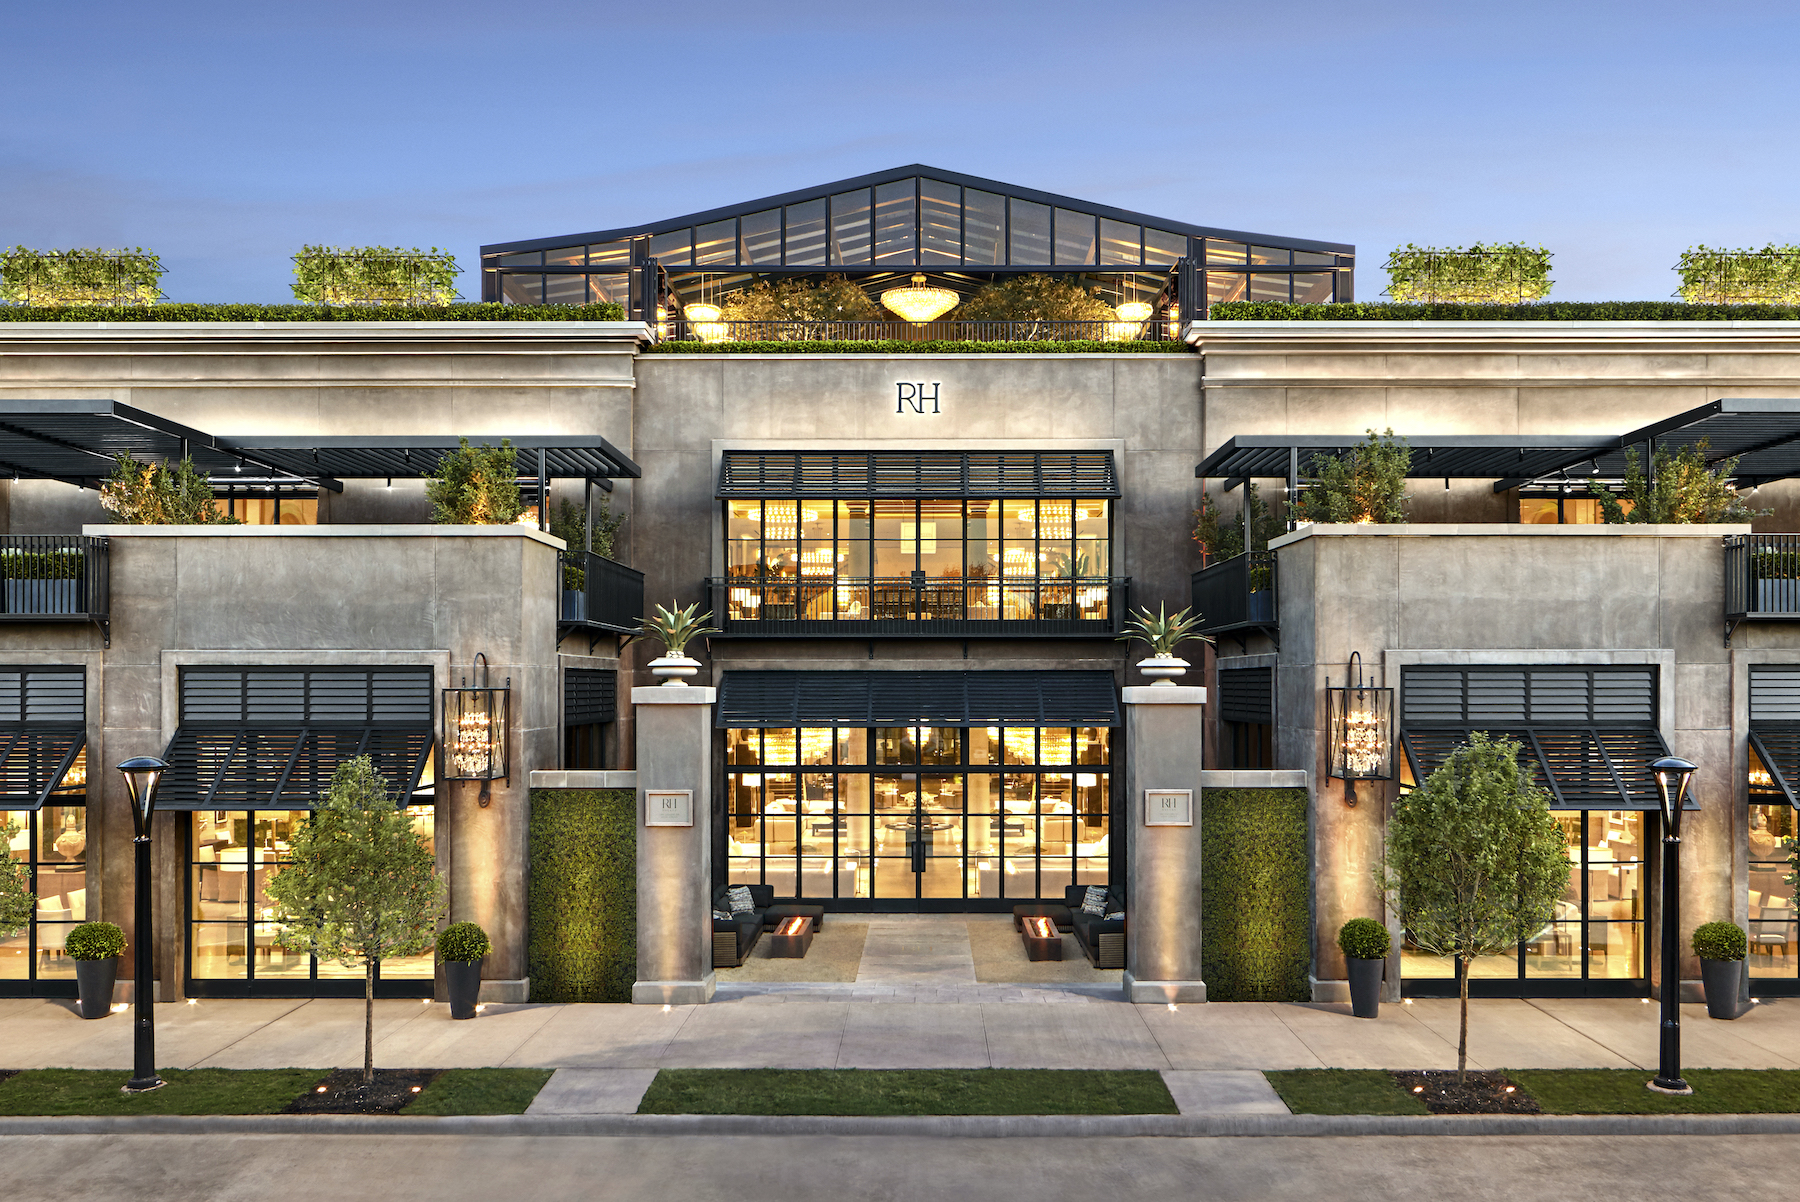 RH Dallas, a 70,000-Square-Foot Store With a Rooftop Restaurant, Is Now Open on Knox